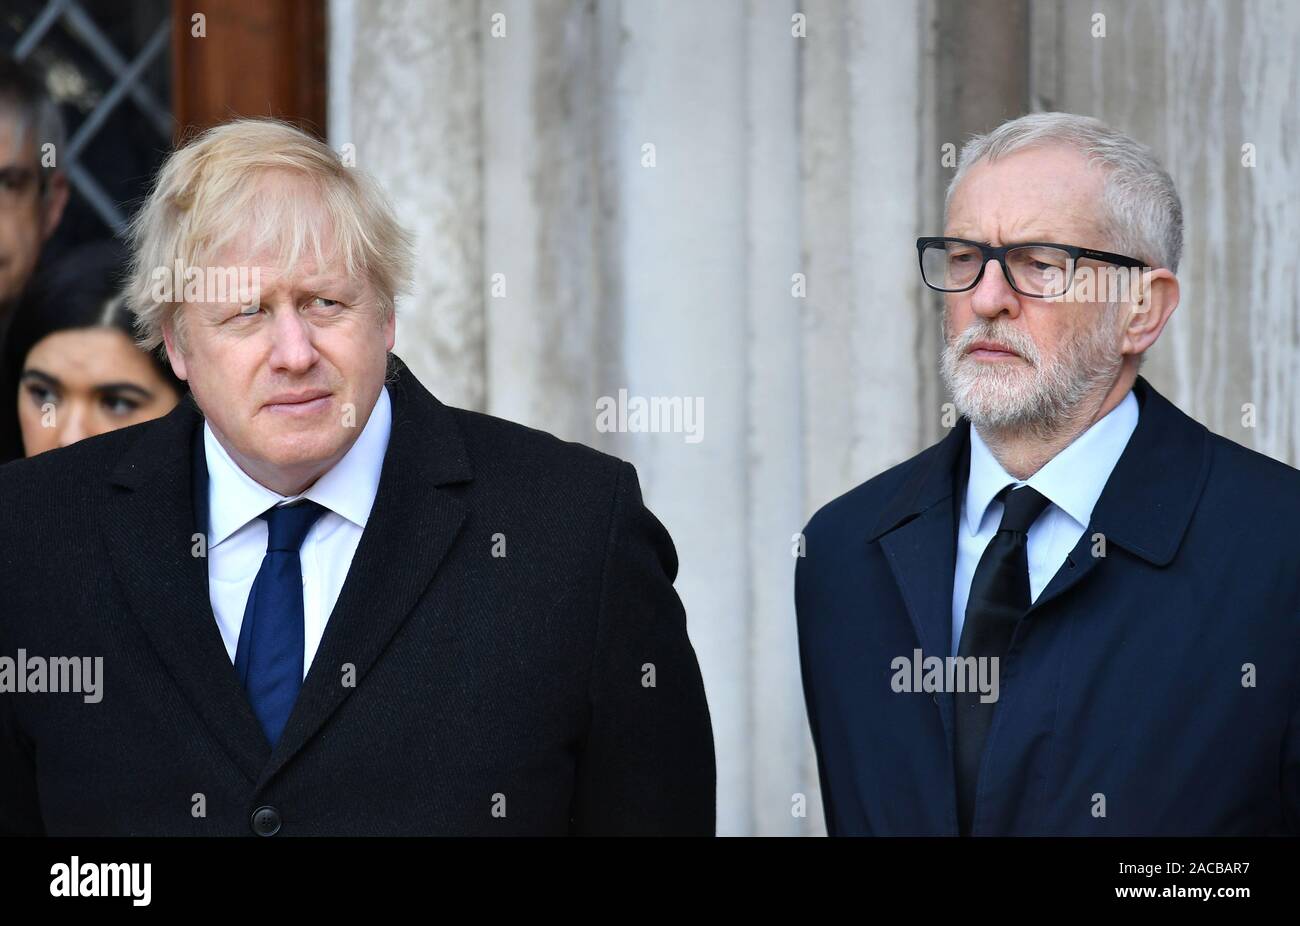 Prime Minister Boris Johnson (left) and Labour leader Jeremy Corbyn take part in a vigil in Guildhall Yard, London, to honour the victims off the London Bridge terror attack, as well as the members of the public and emergency services who risked their lives to help others after a terrorist wearing a fake suicide vest went on a knife rampage killing two people, was shot dead by police on Friday. Stock Photo